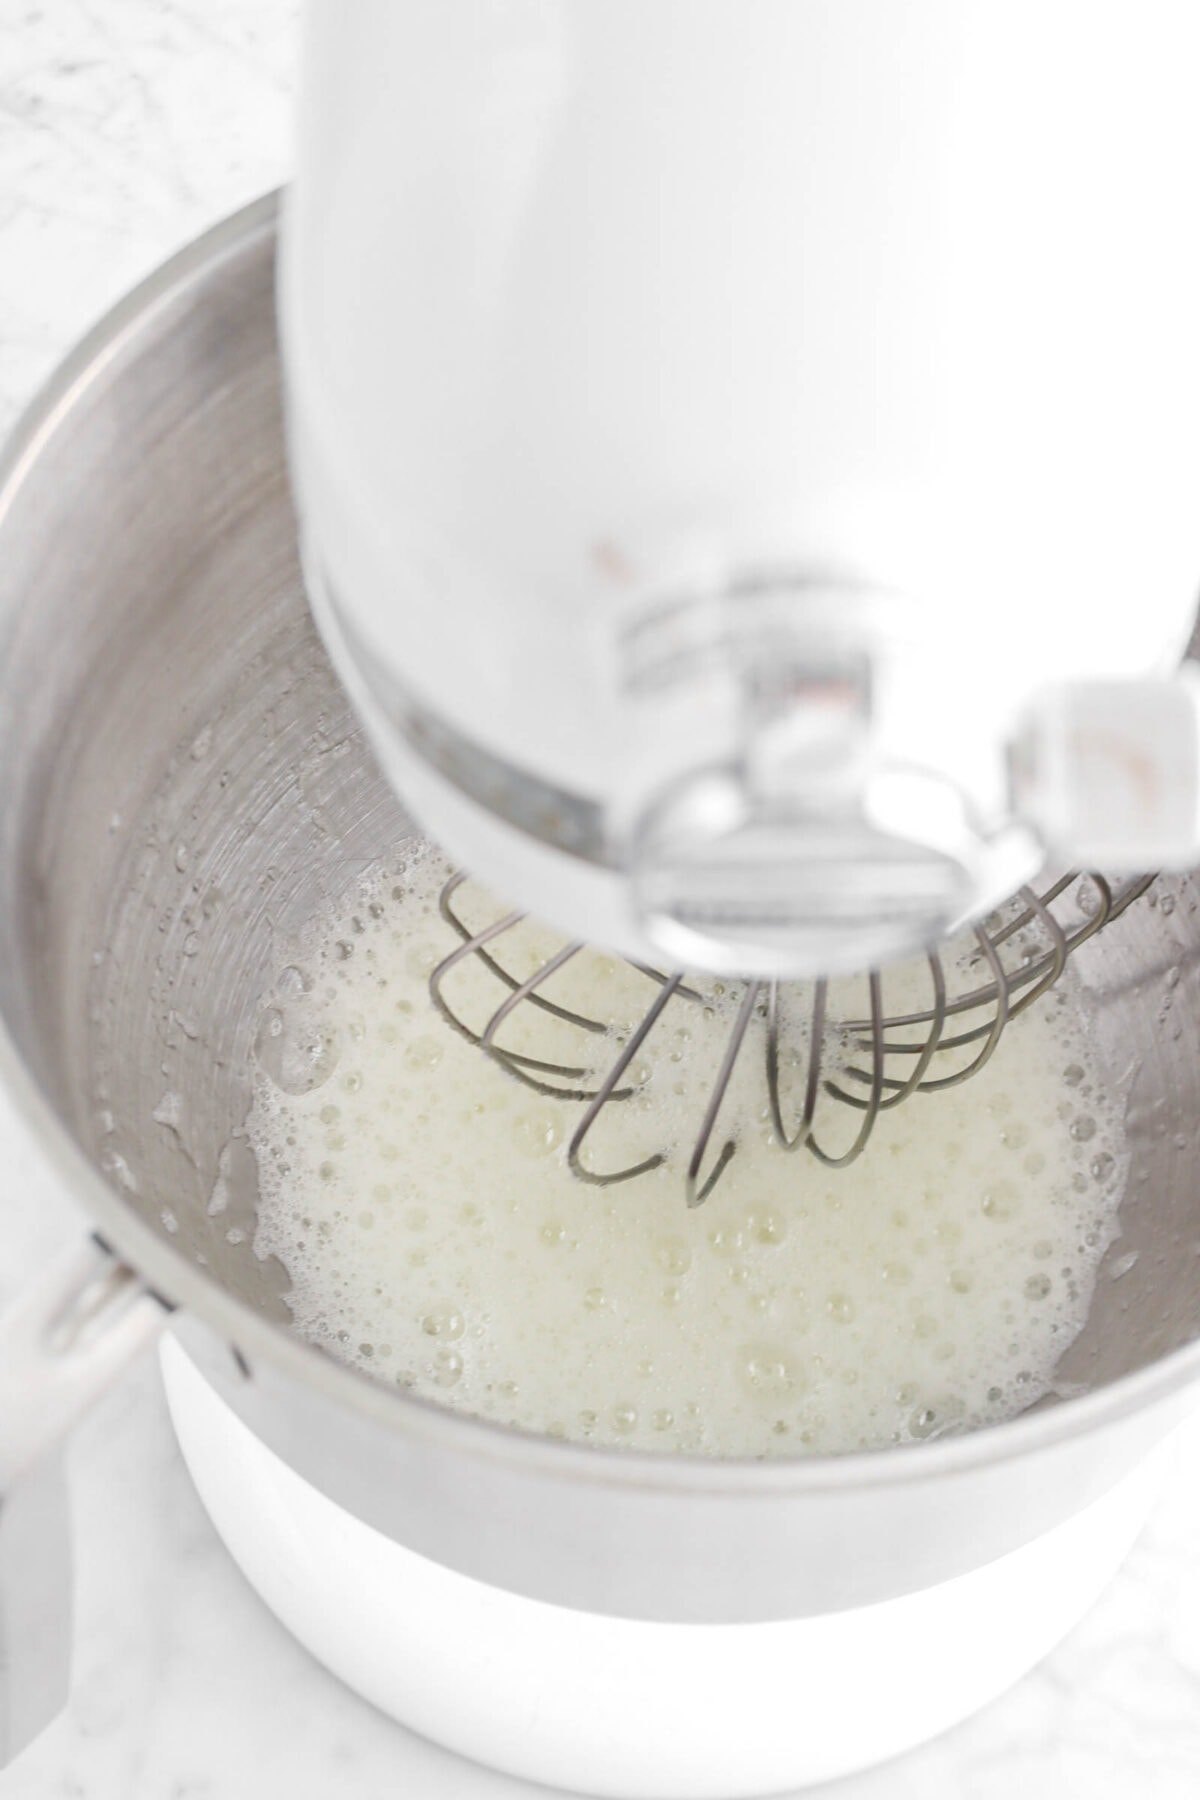 frothy egg whites in mixer